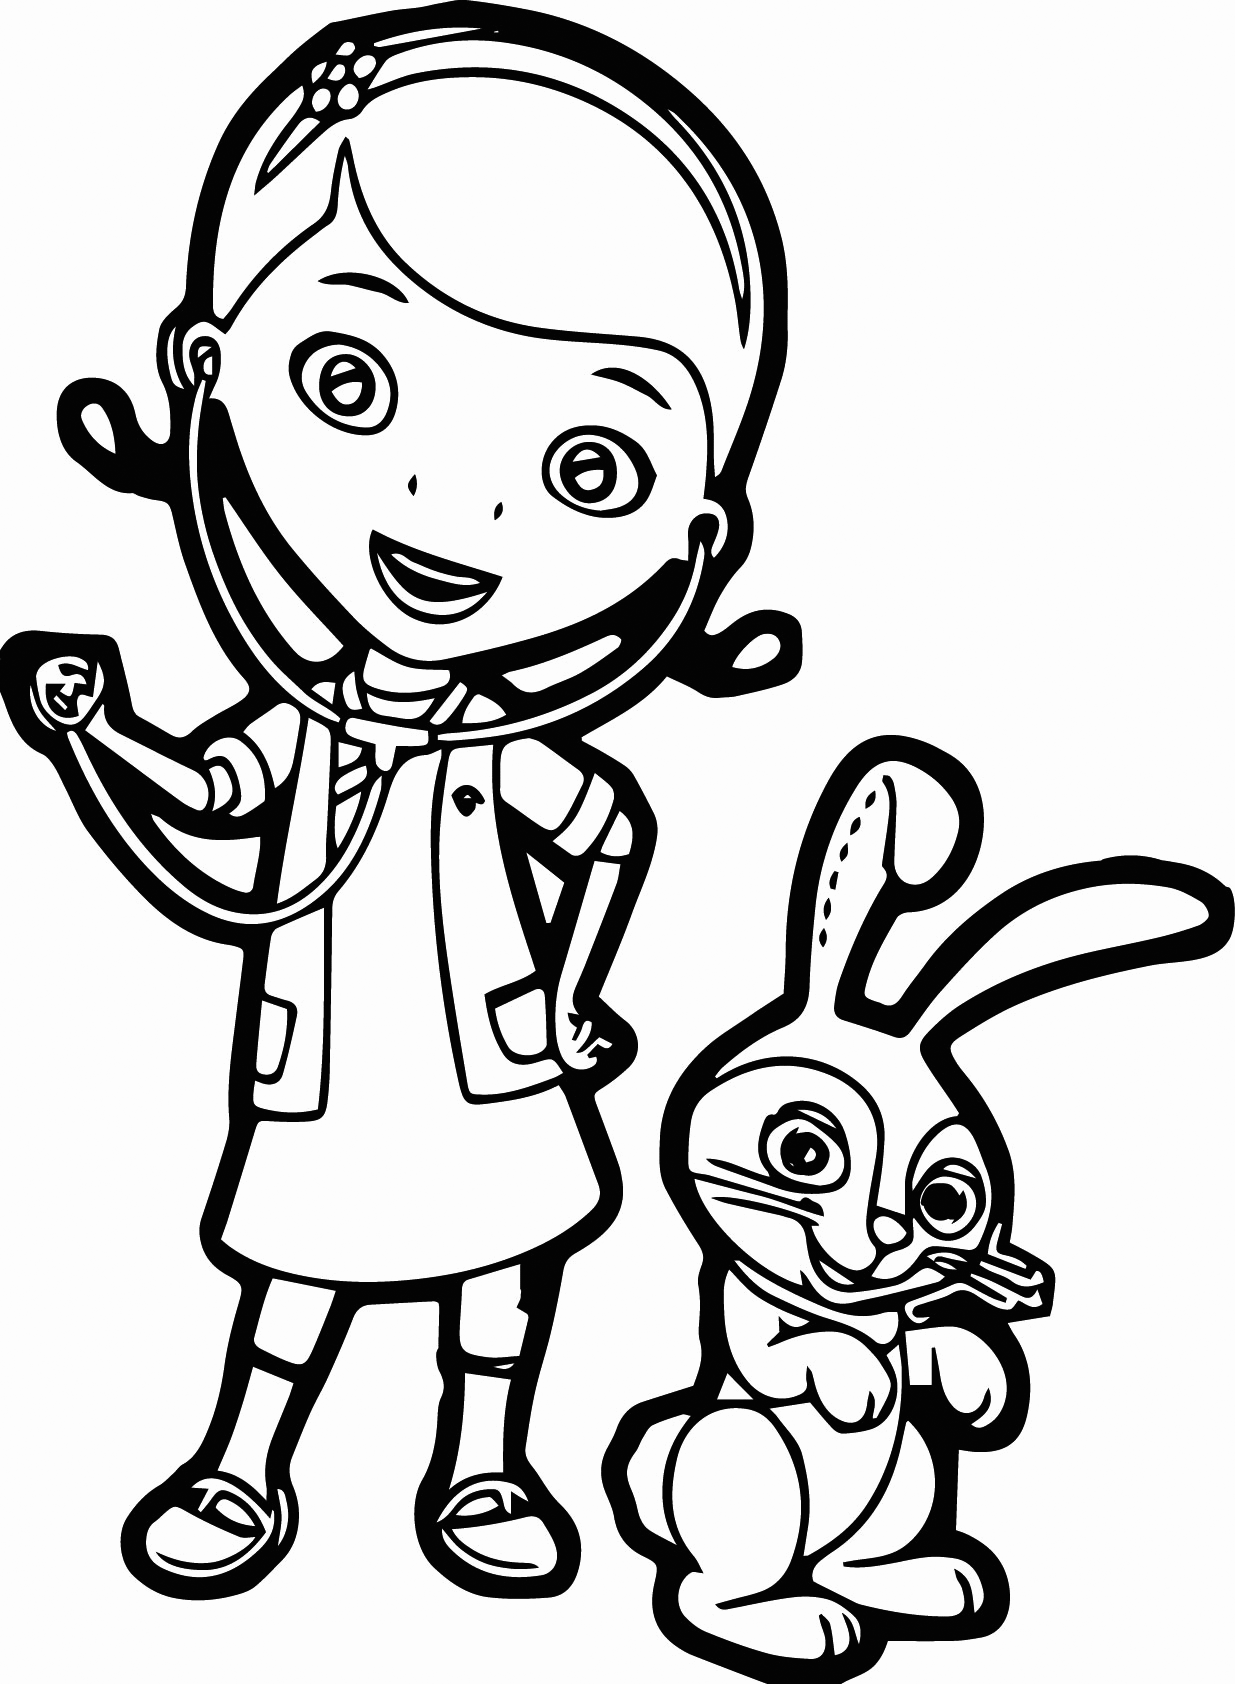 Girl Veterinarian Coloring Page